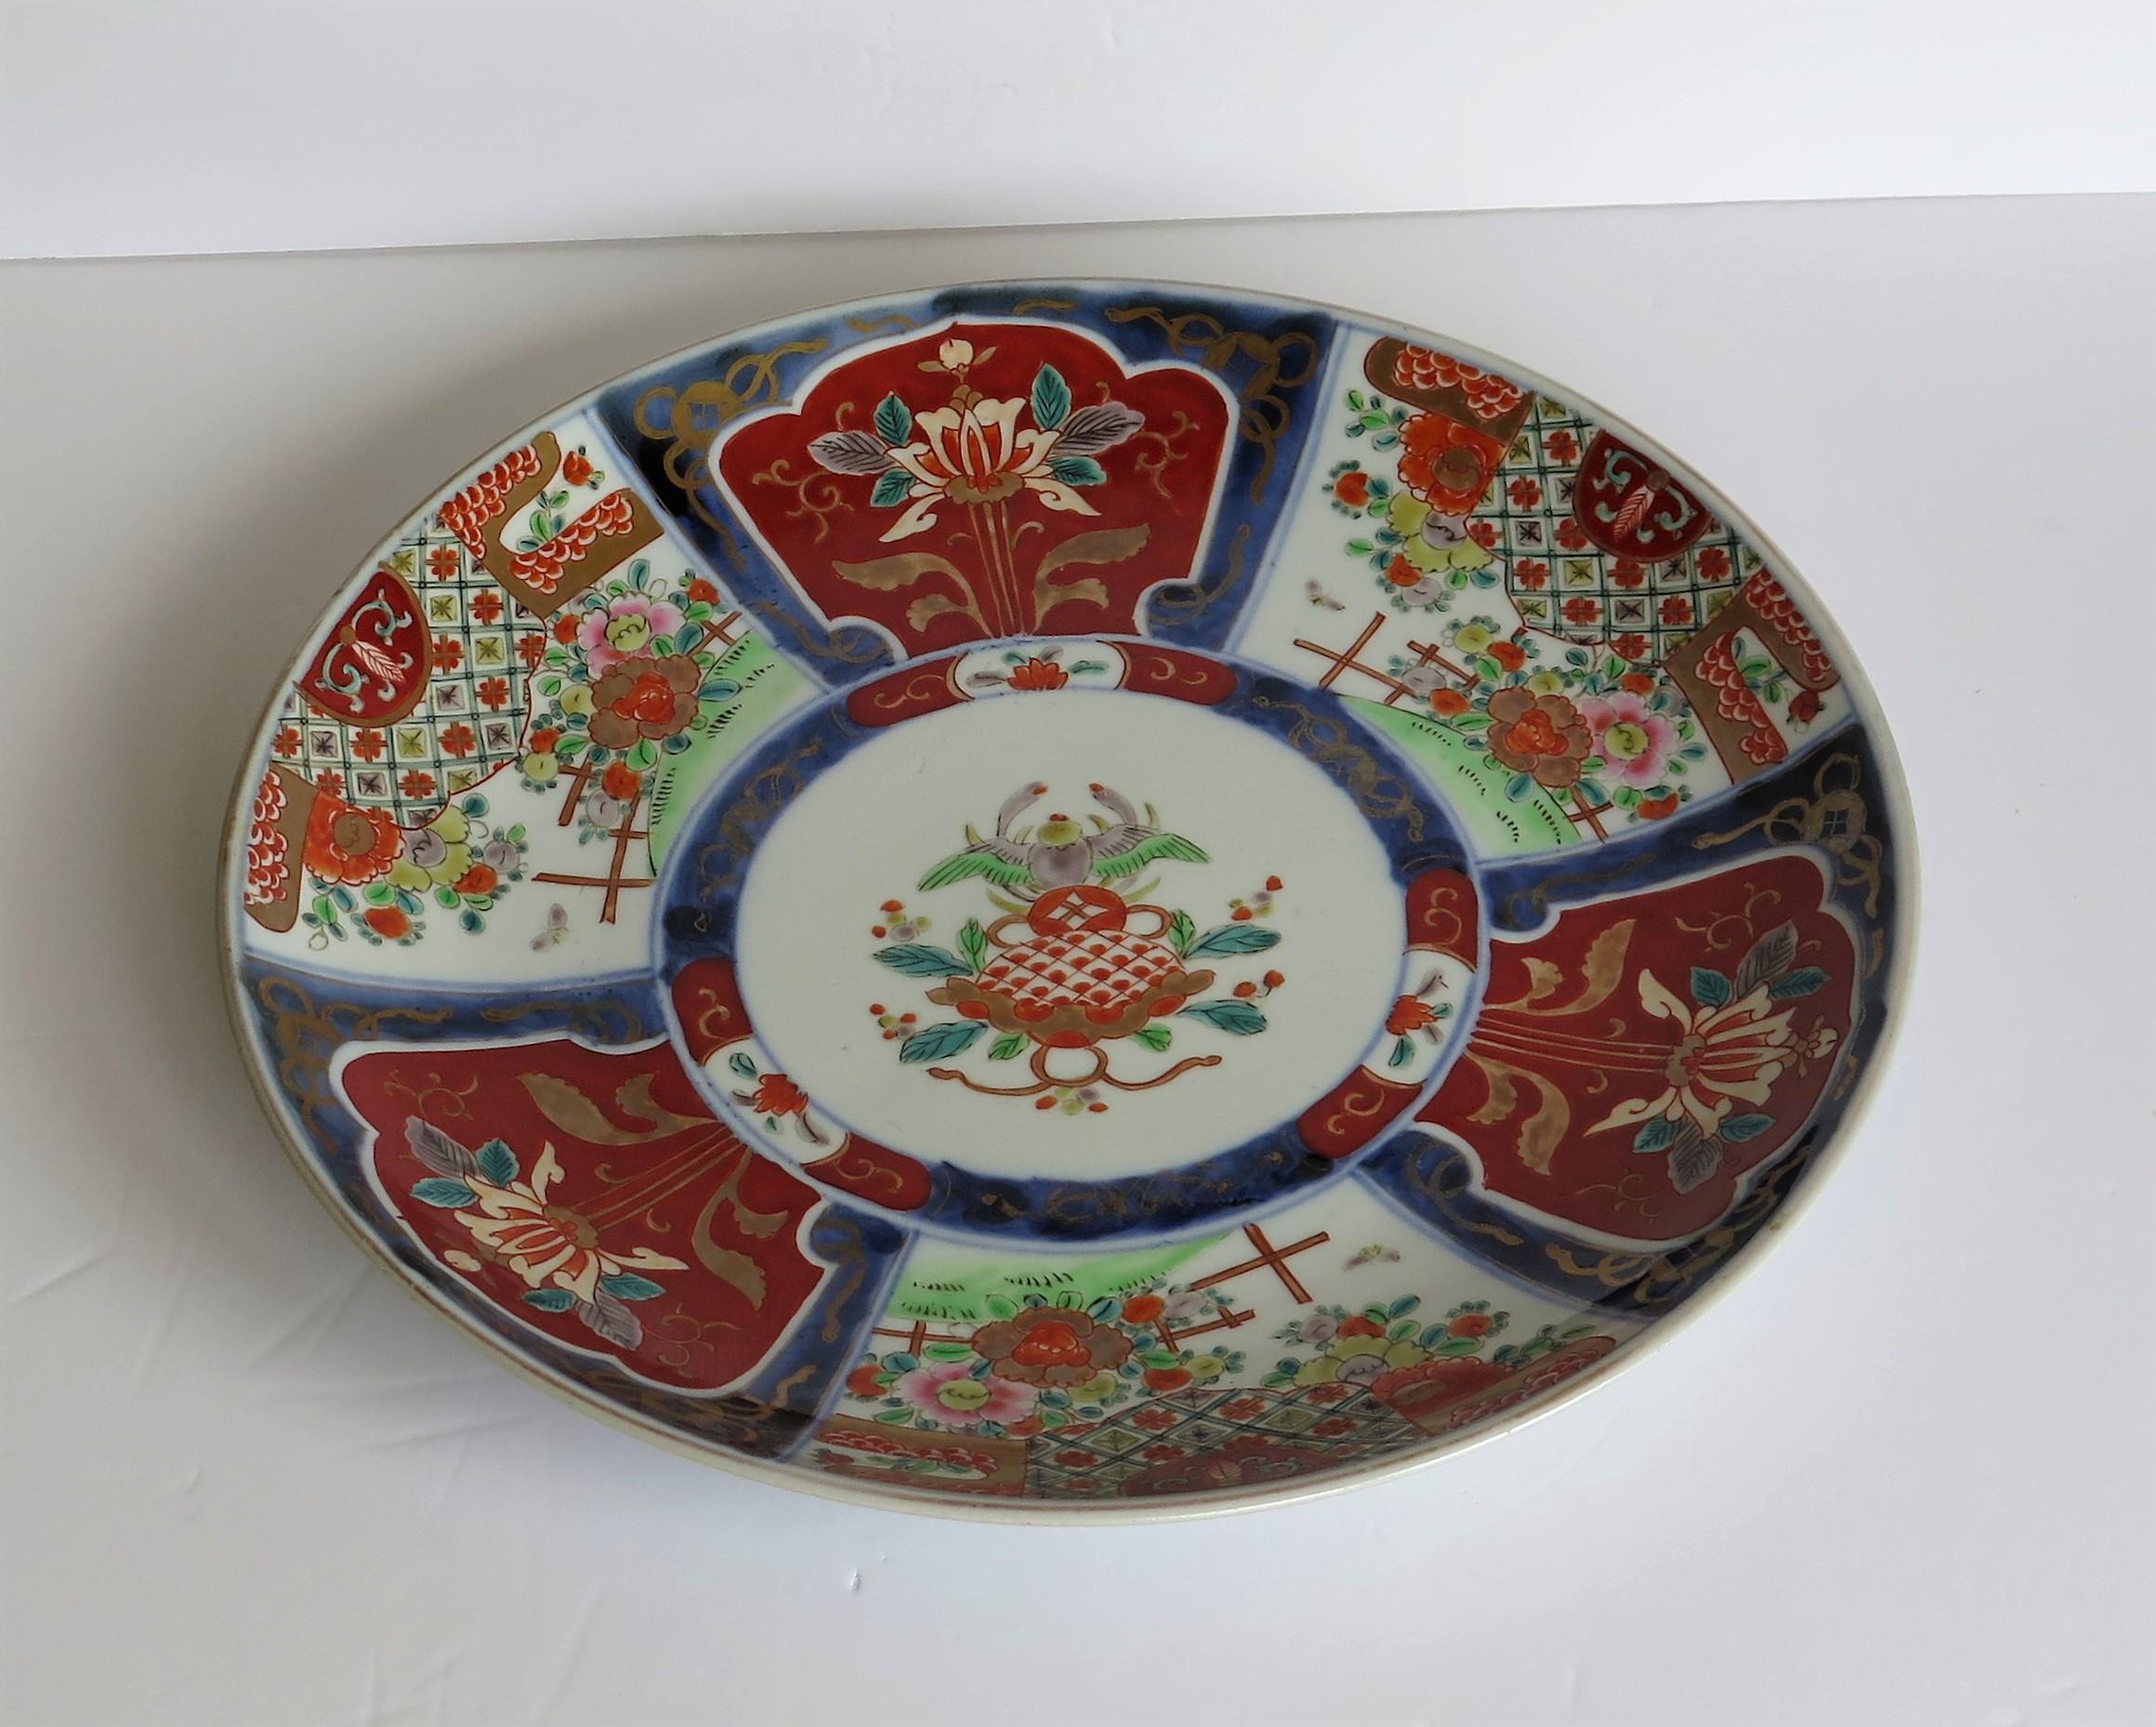 This is a good quality, hand decorated Japanese porcelain charger, large plate or bowl with an Imari pattern, dating to the late 19th century, Meiji period, circa 1880.

The circular charger is well potted on a low foot.

It is hand decorated in